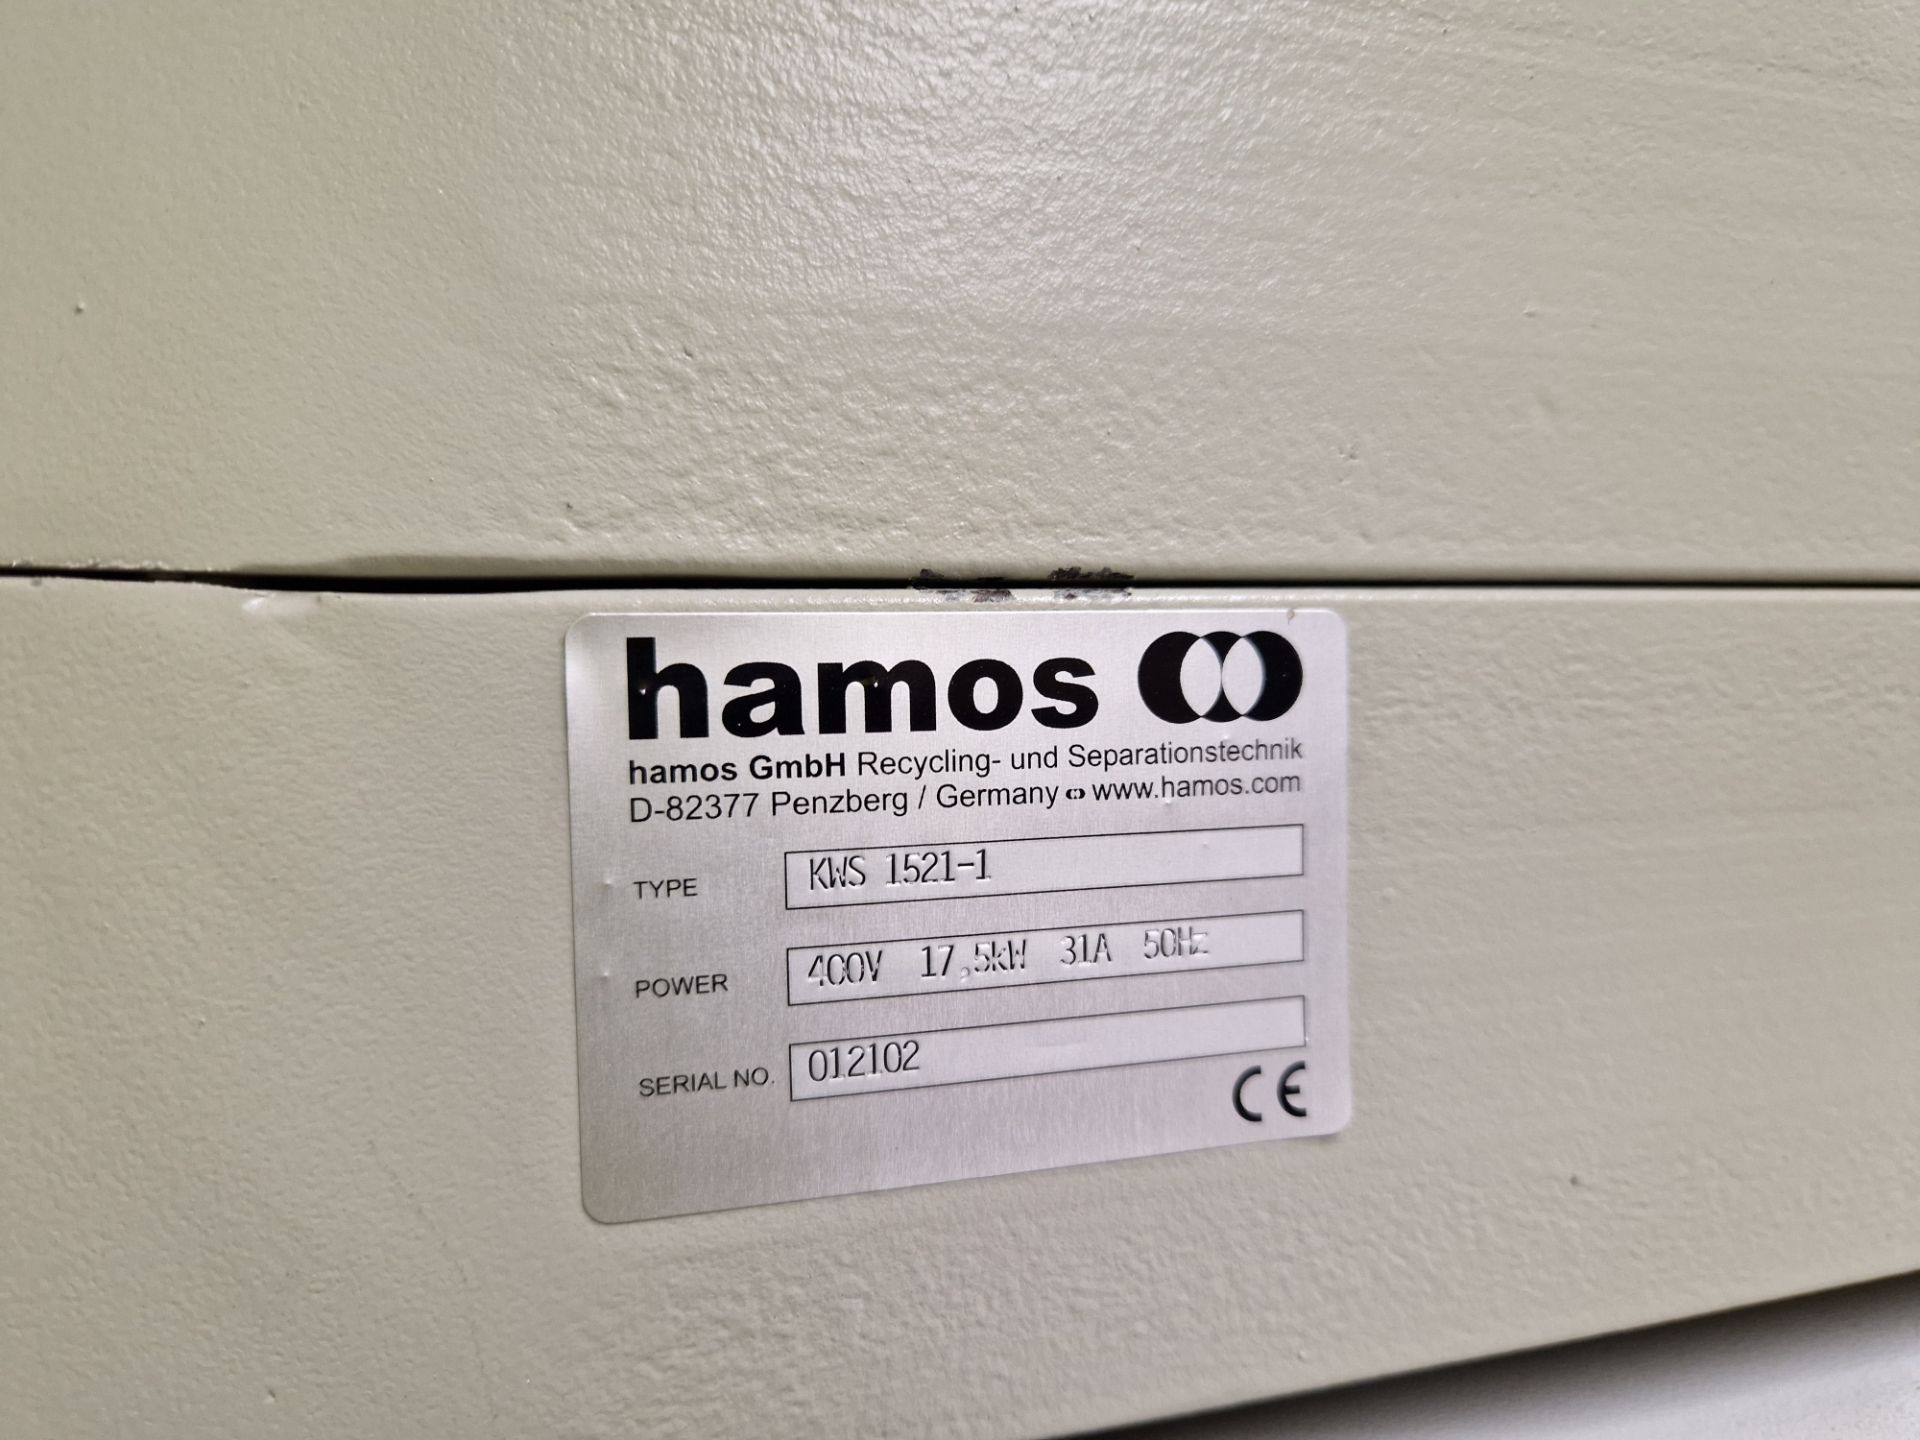 HAMOS KWS 1521-1 Electrostatic Separator , Serial no. 012102, YoM 2021, Working Hours 4039, with - Image 6 of 15